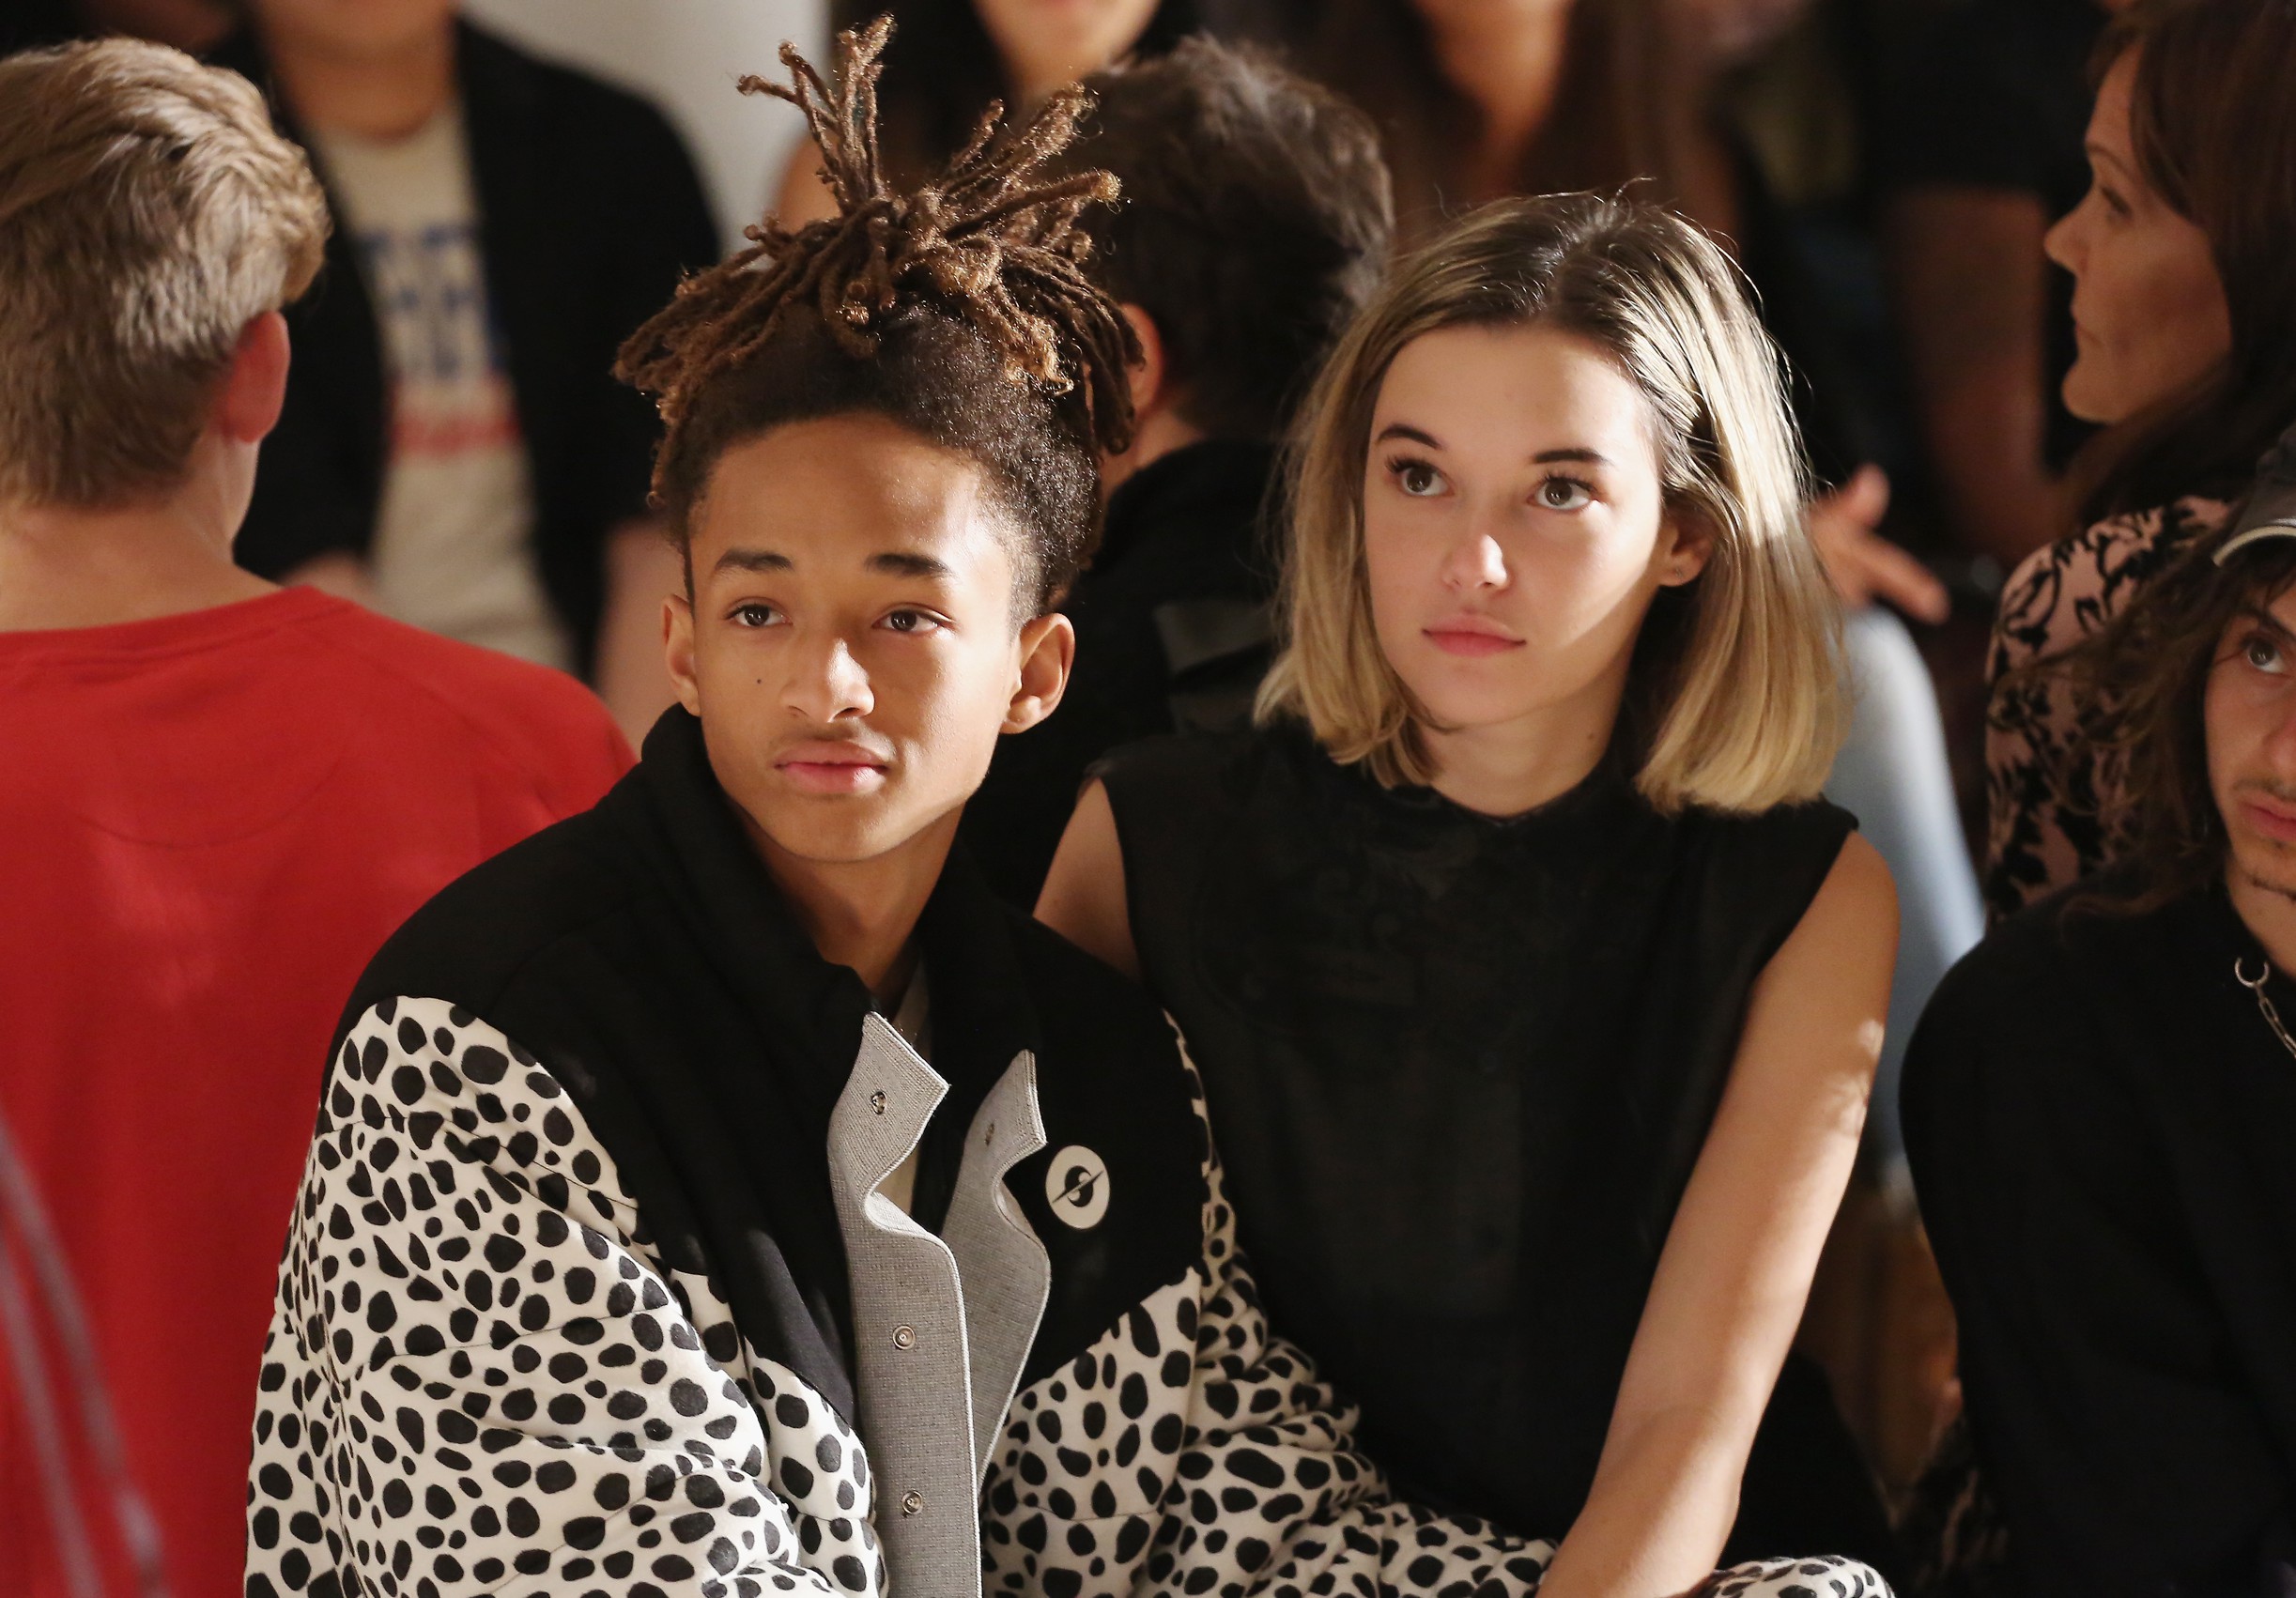 Jaden Smith is the new face of Louis Vuitton, models womenswear - National